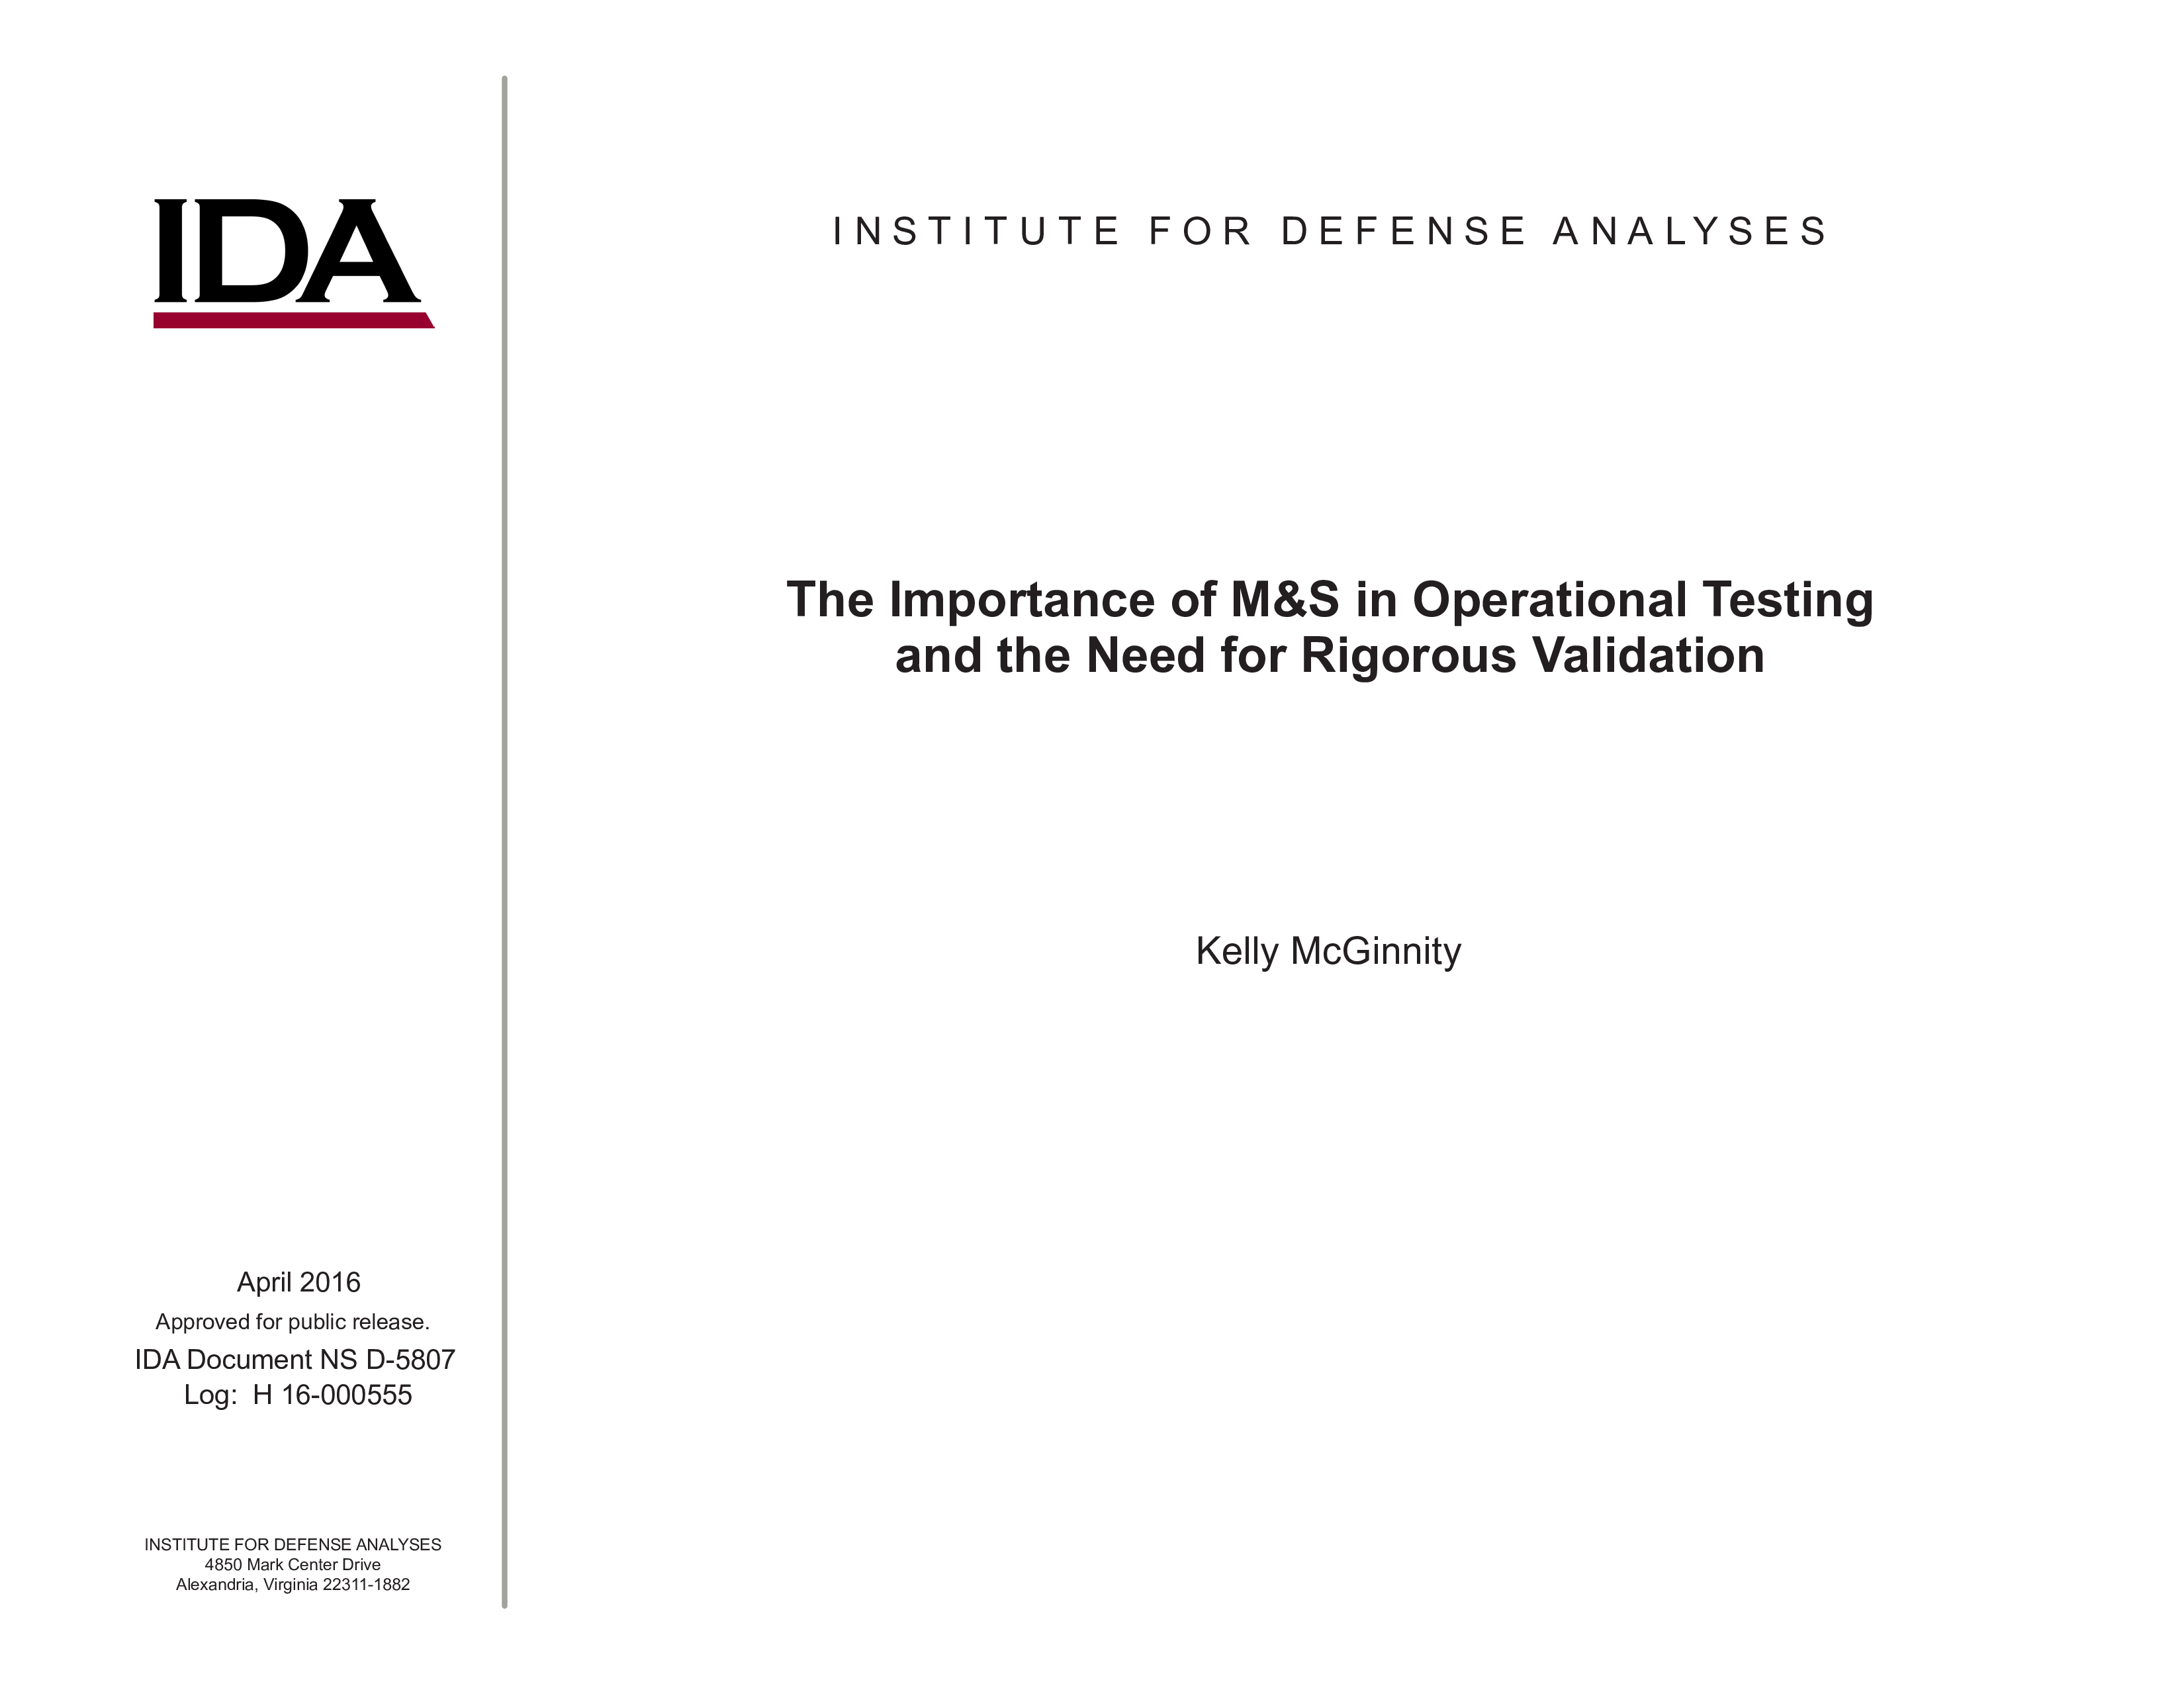 The Importance of M&S in Operational Testing and the Need for Rigorous Validation